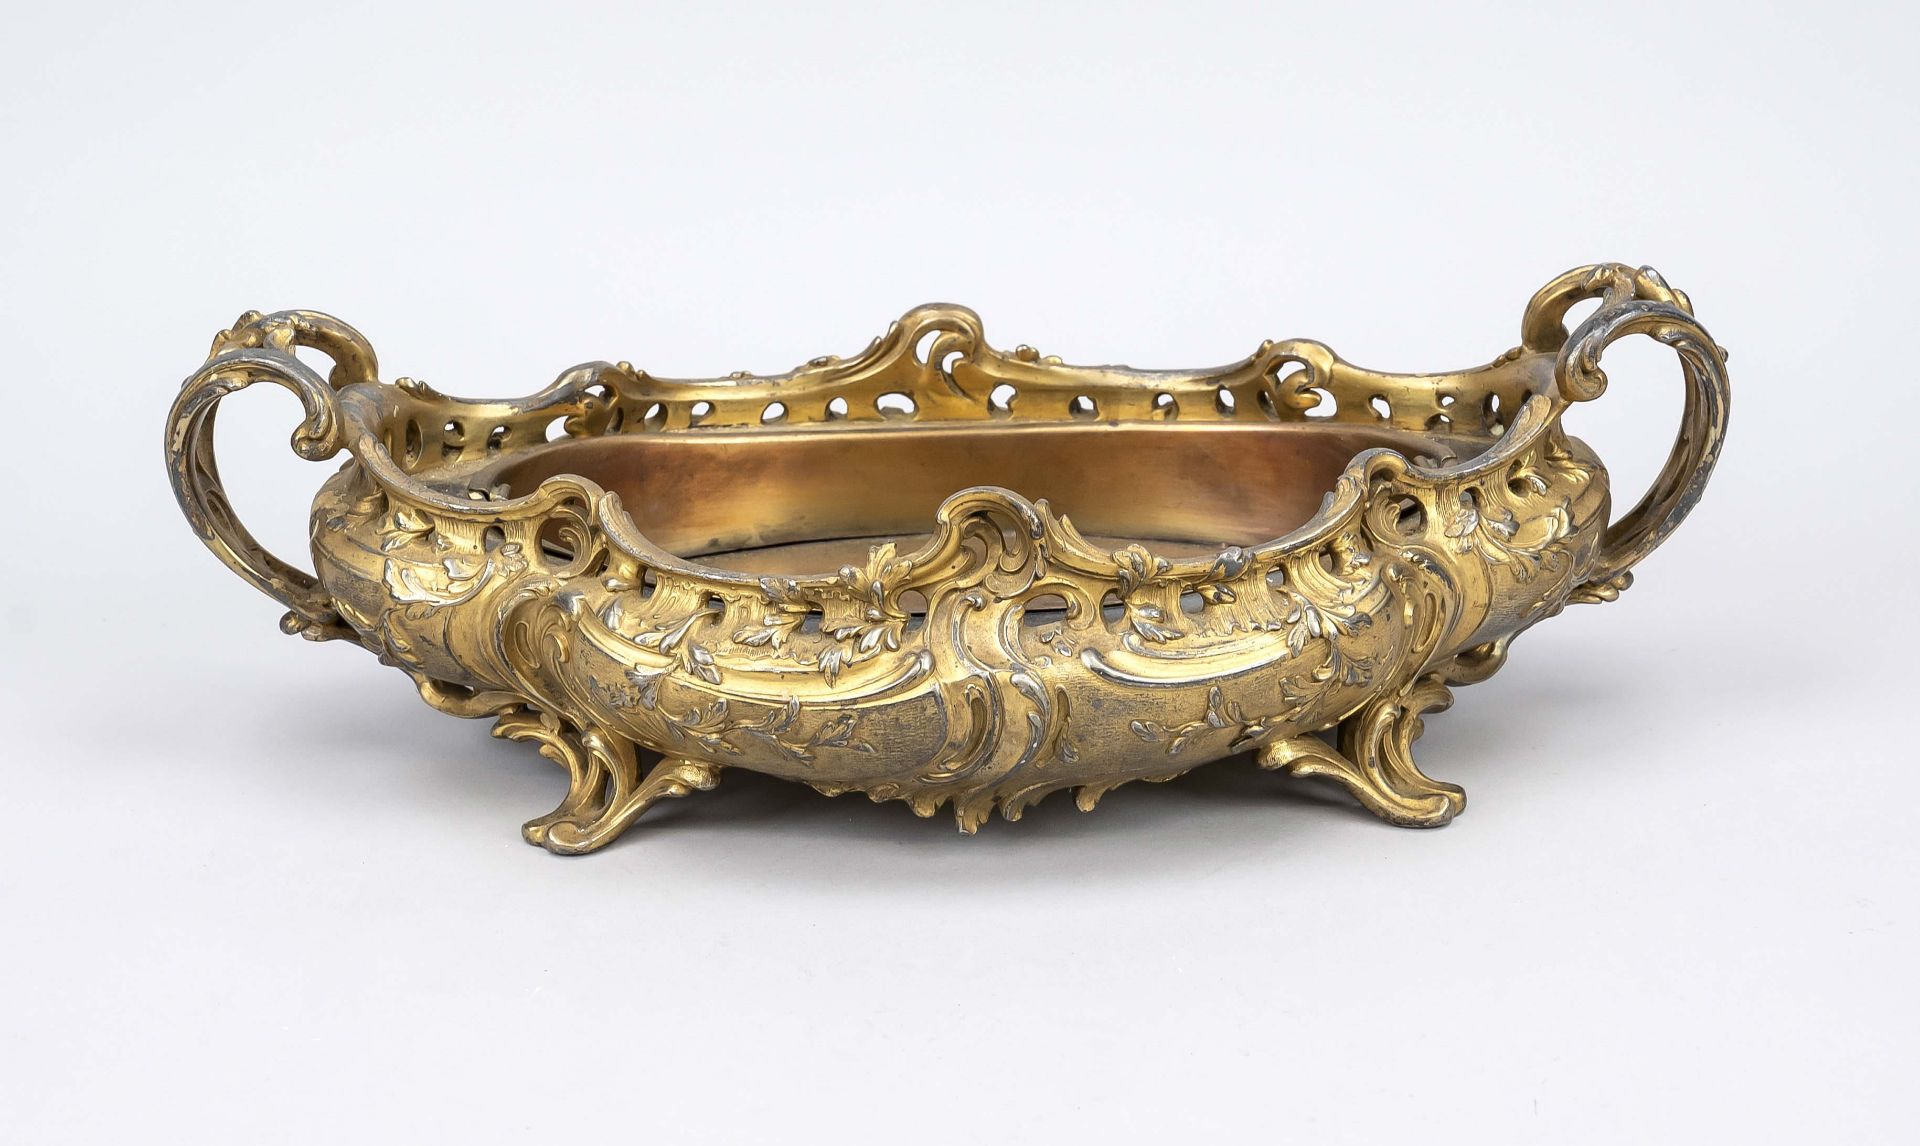 Jardinière, late 19th century, gilt bronze with removable insert of sheet copper. Curved and open-